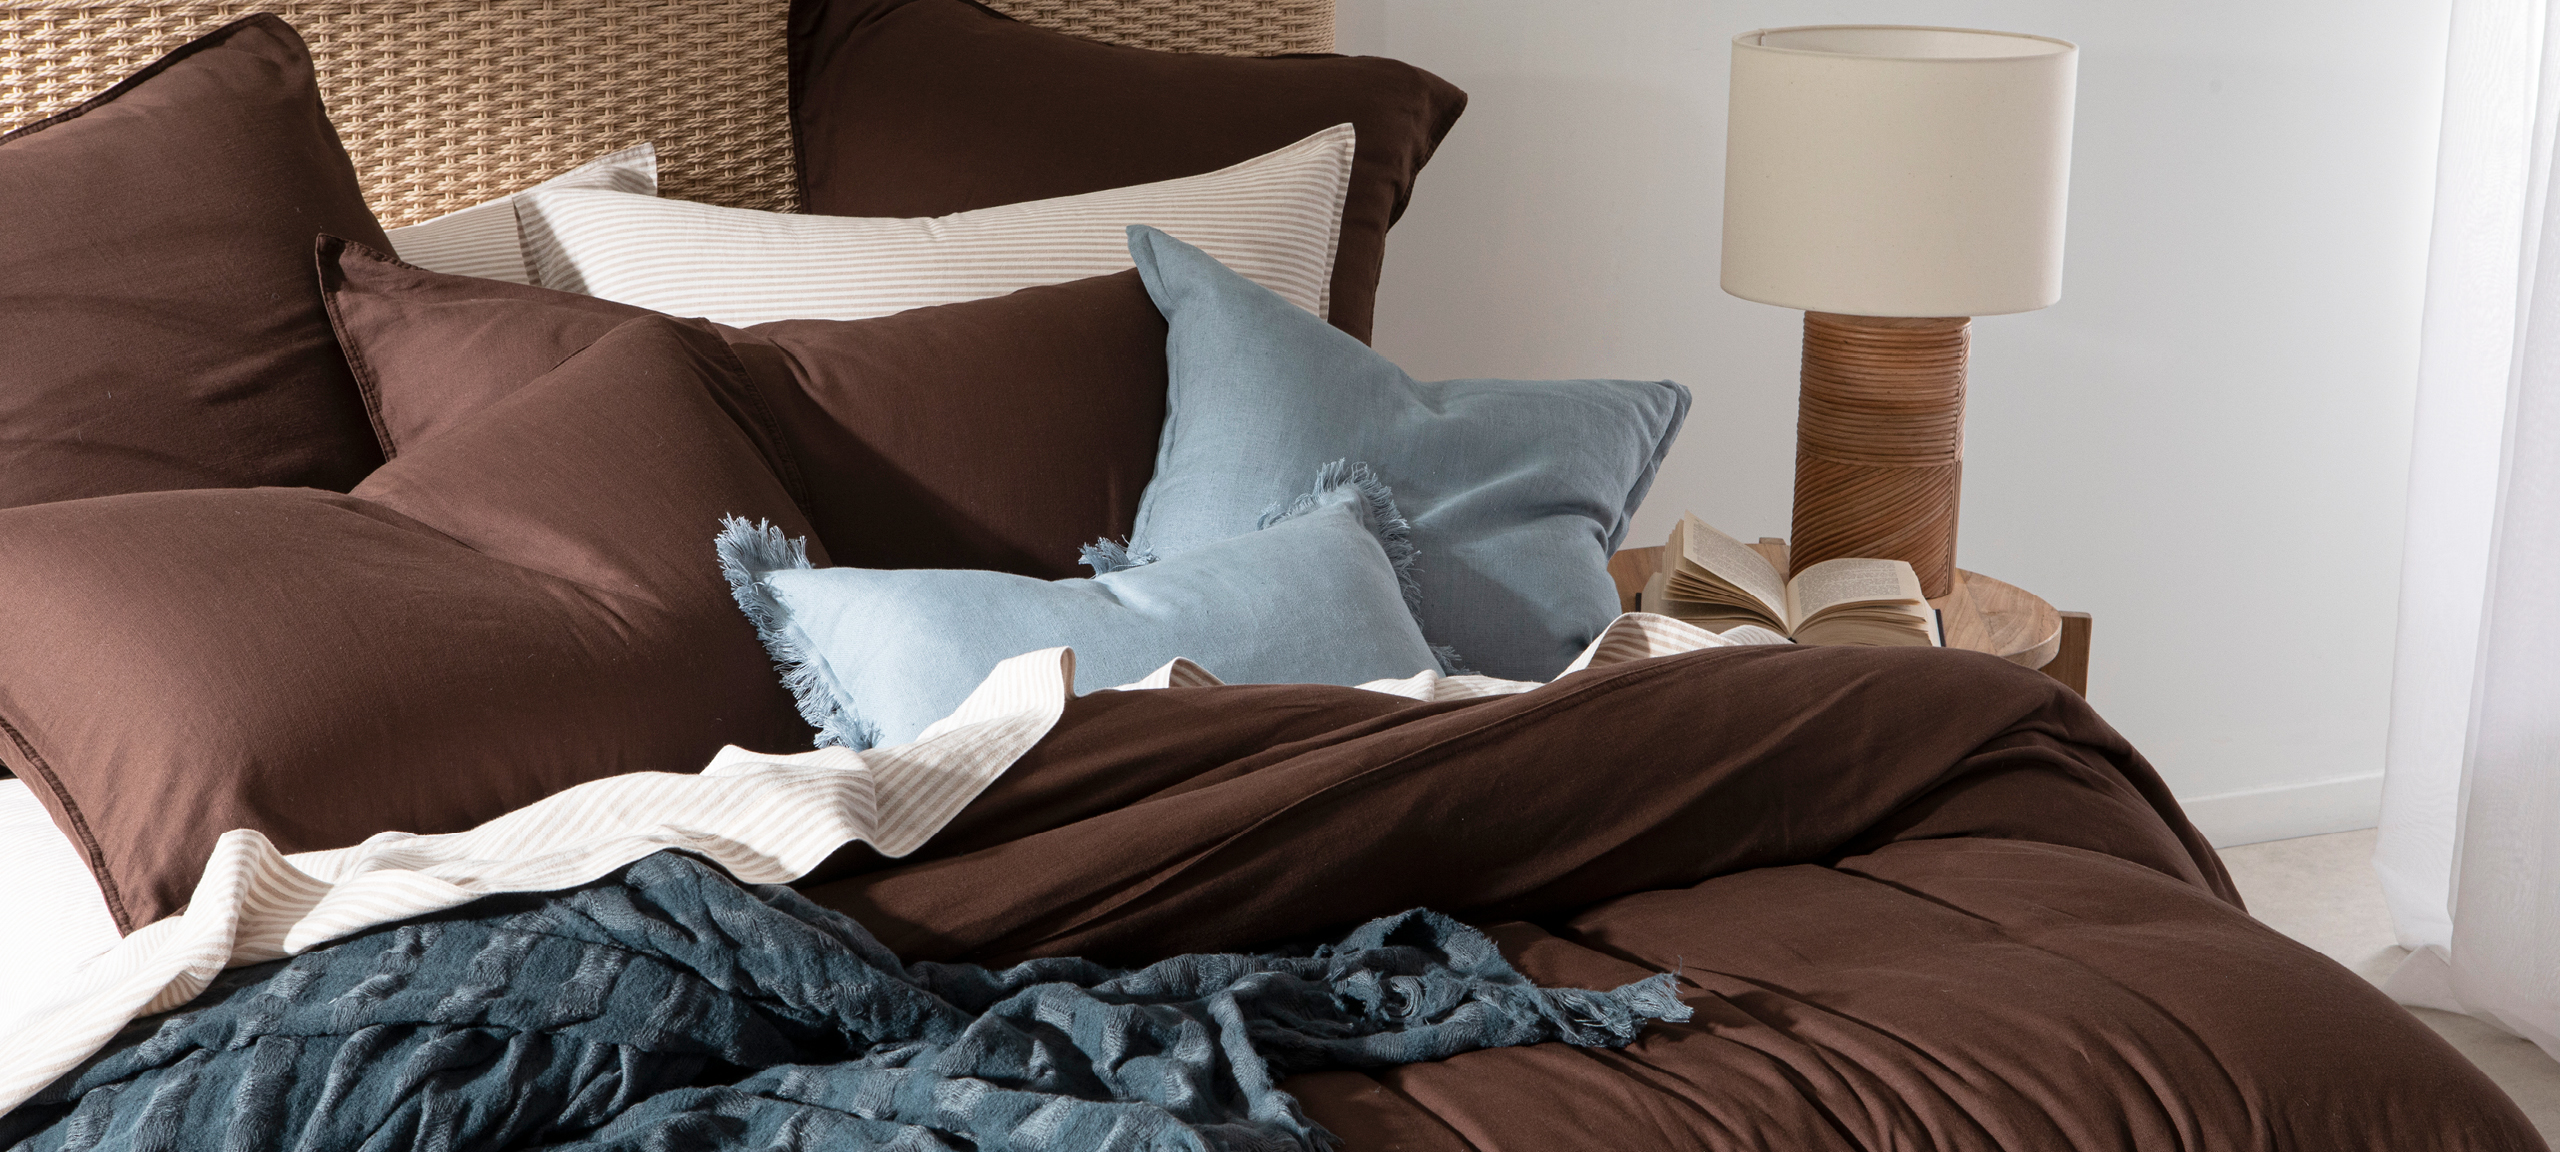 Pillow Talk bed styling for winter 